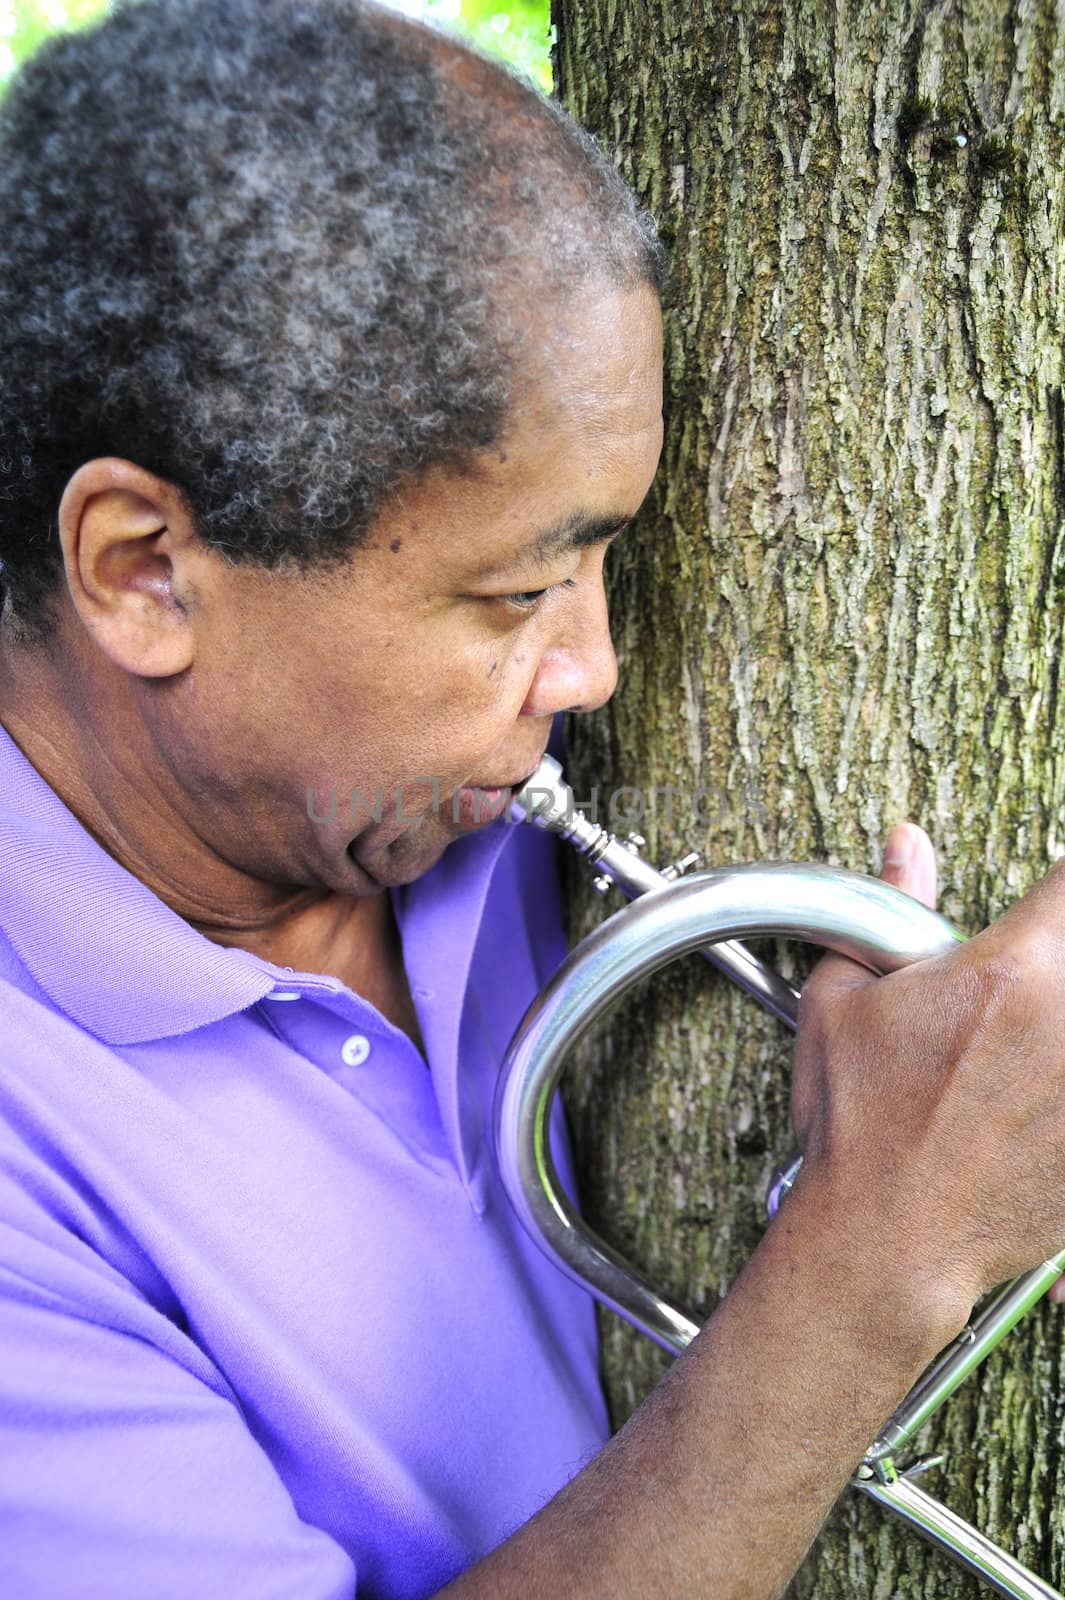 Jazz musician playing his instrument in the woods.